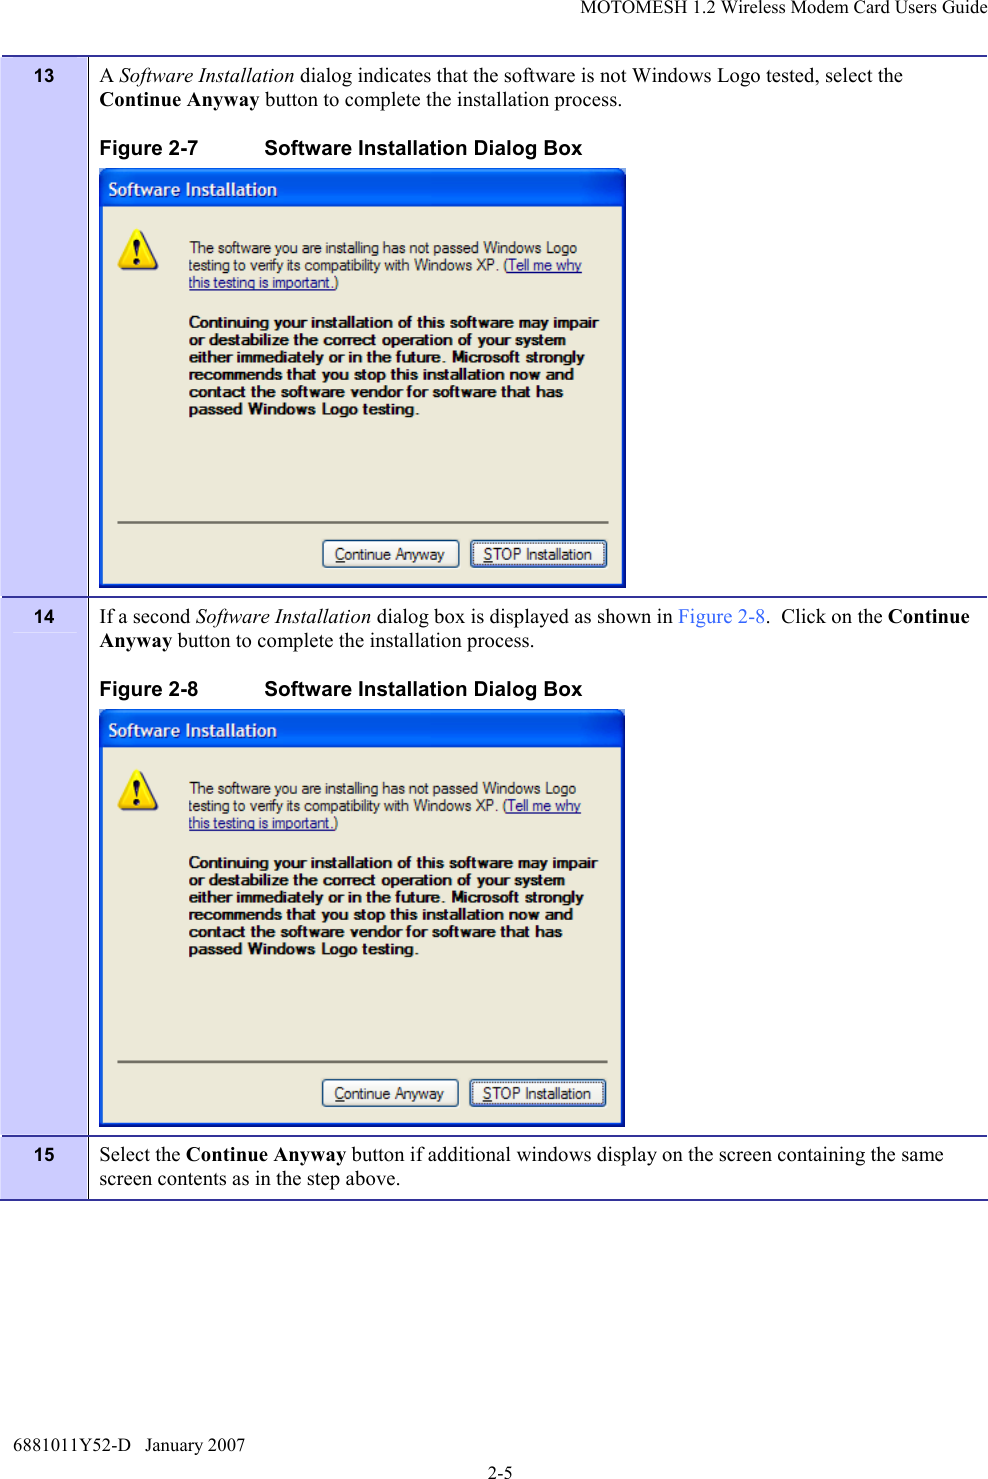 MOTOMESH 1.2 Wireless Modem Card Users Guide 6881011Y52-D   January 2007 2-5 13  A Software Installation dialog indicates that the software is not Windows Logo tested, select the Continue Anyway button to complete the installation process.  Figure 2-7  Software Installation Dialog Box  14  If a second Software Installation dialog box is displayed as shown in Figure 2-8.  Click on the Continue Anyway button to complete the installation process. Figure 2-8  Software Installation Dialog Box  15  Select the Continue Anyway button if additional windows display on the screen containing the same screen contents as in the step above. 